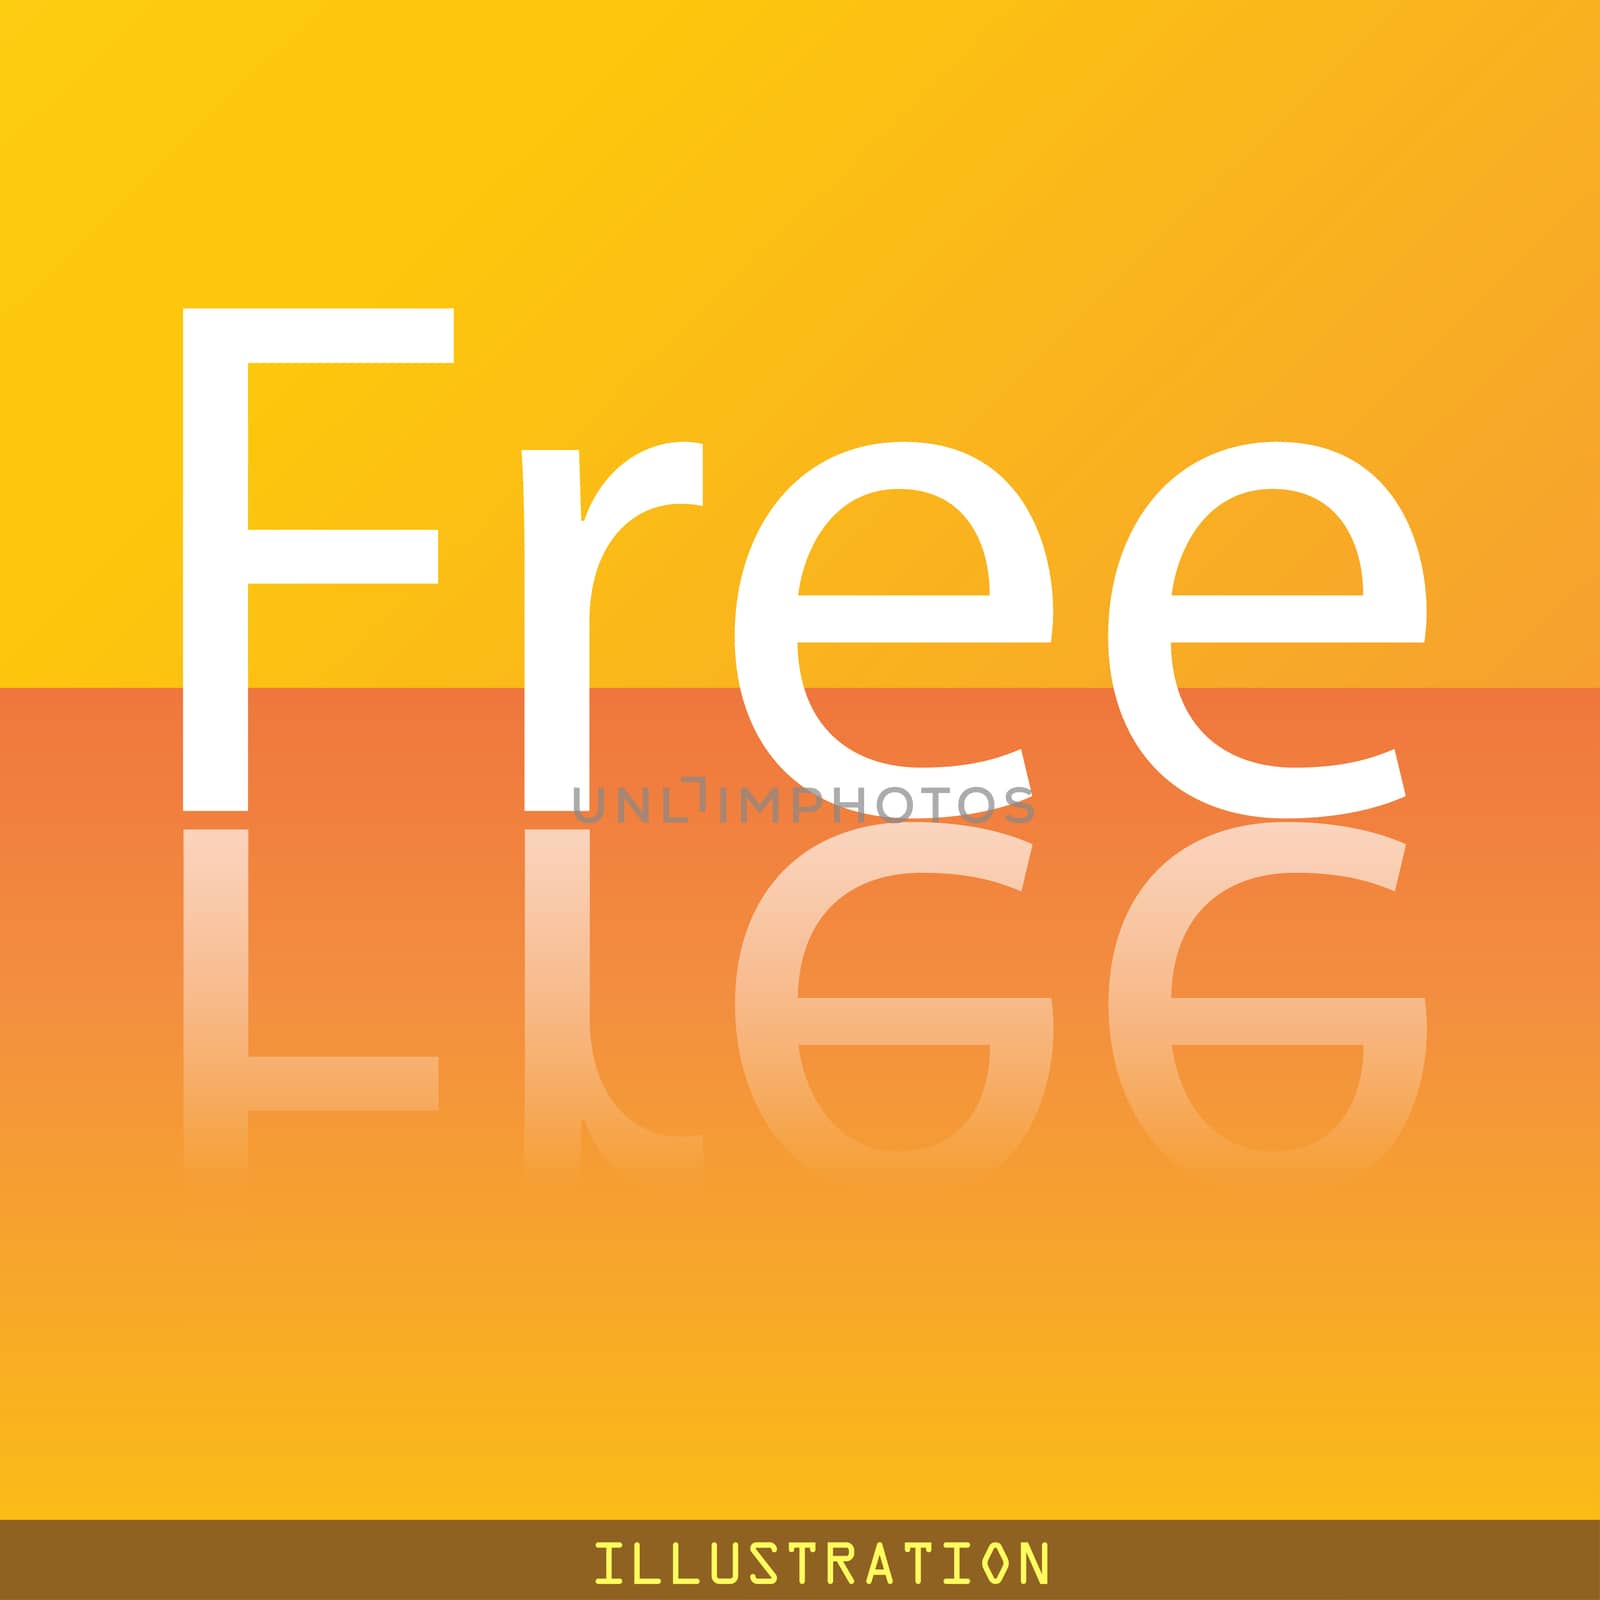 Free icon symbol Flat modern web design with reflection and space for your text. illustration. Raster version